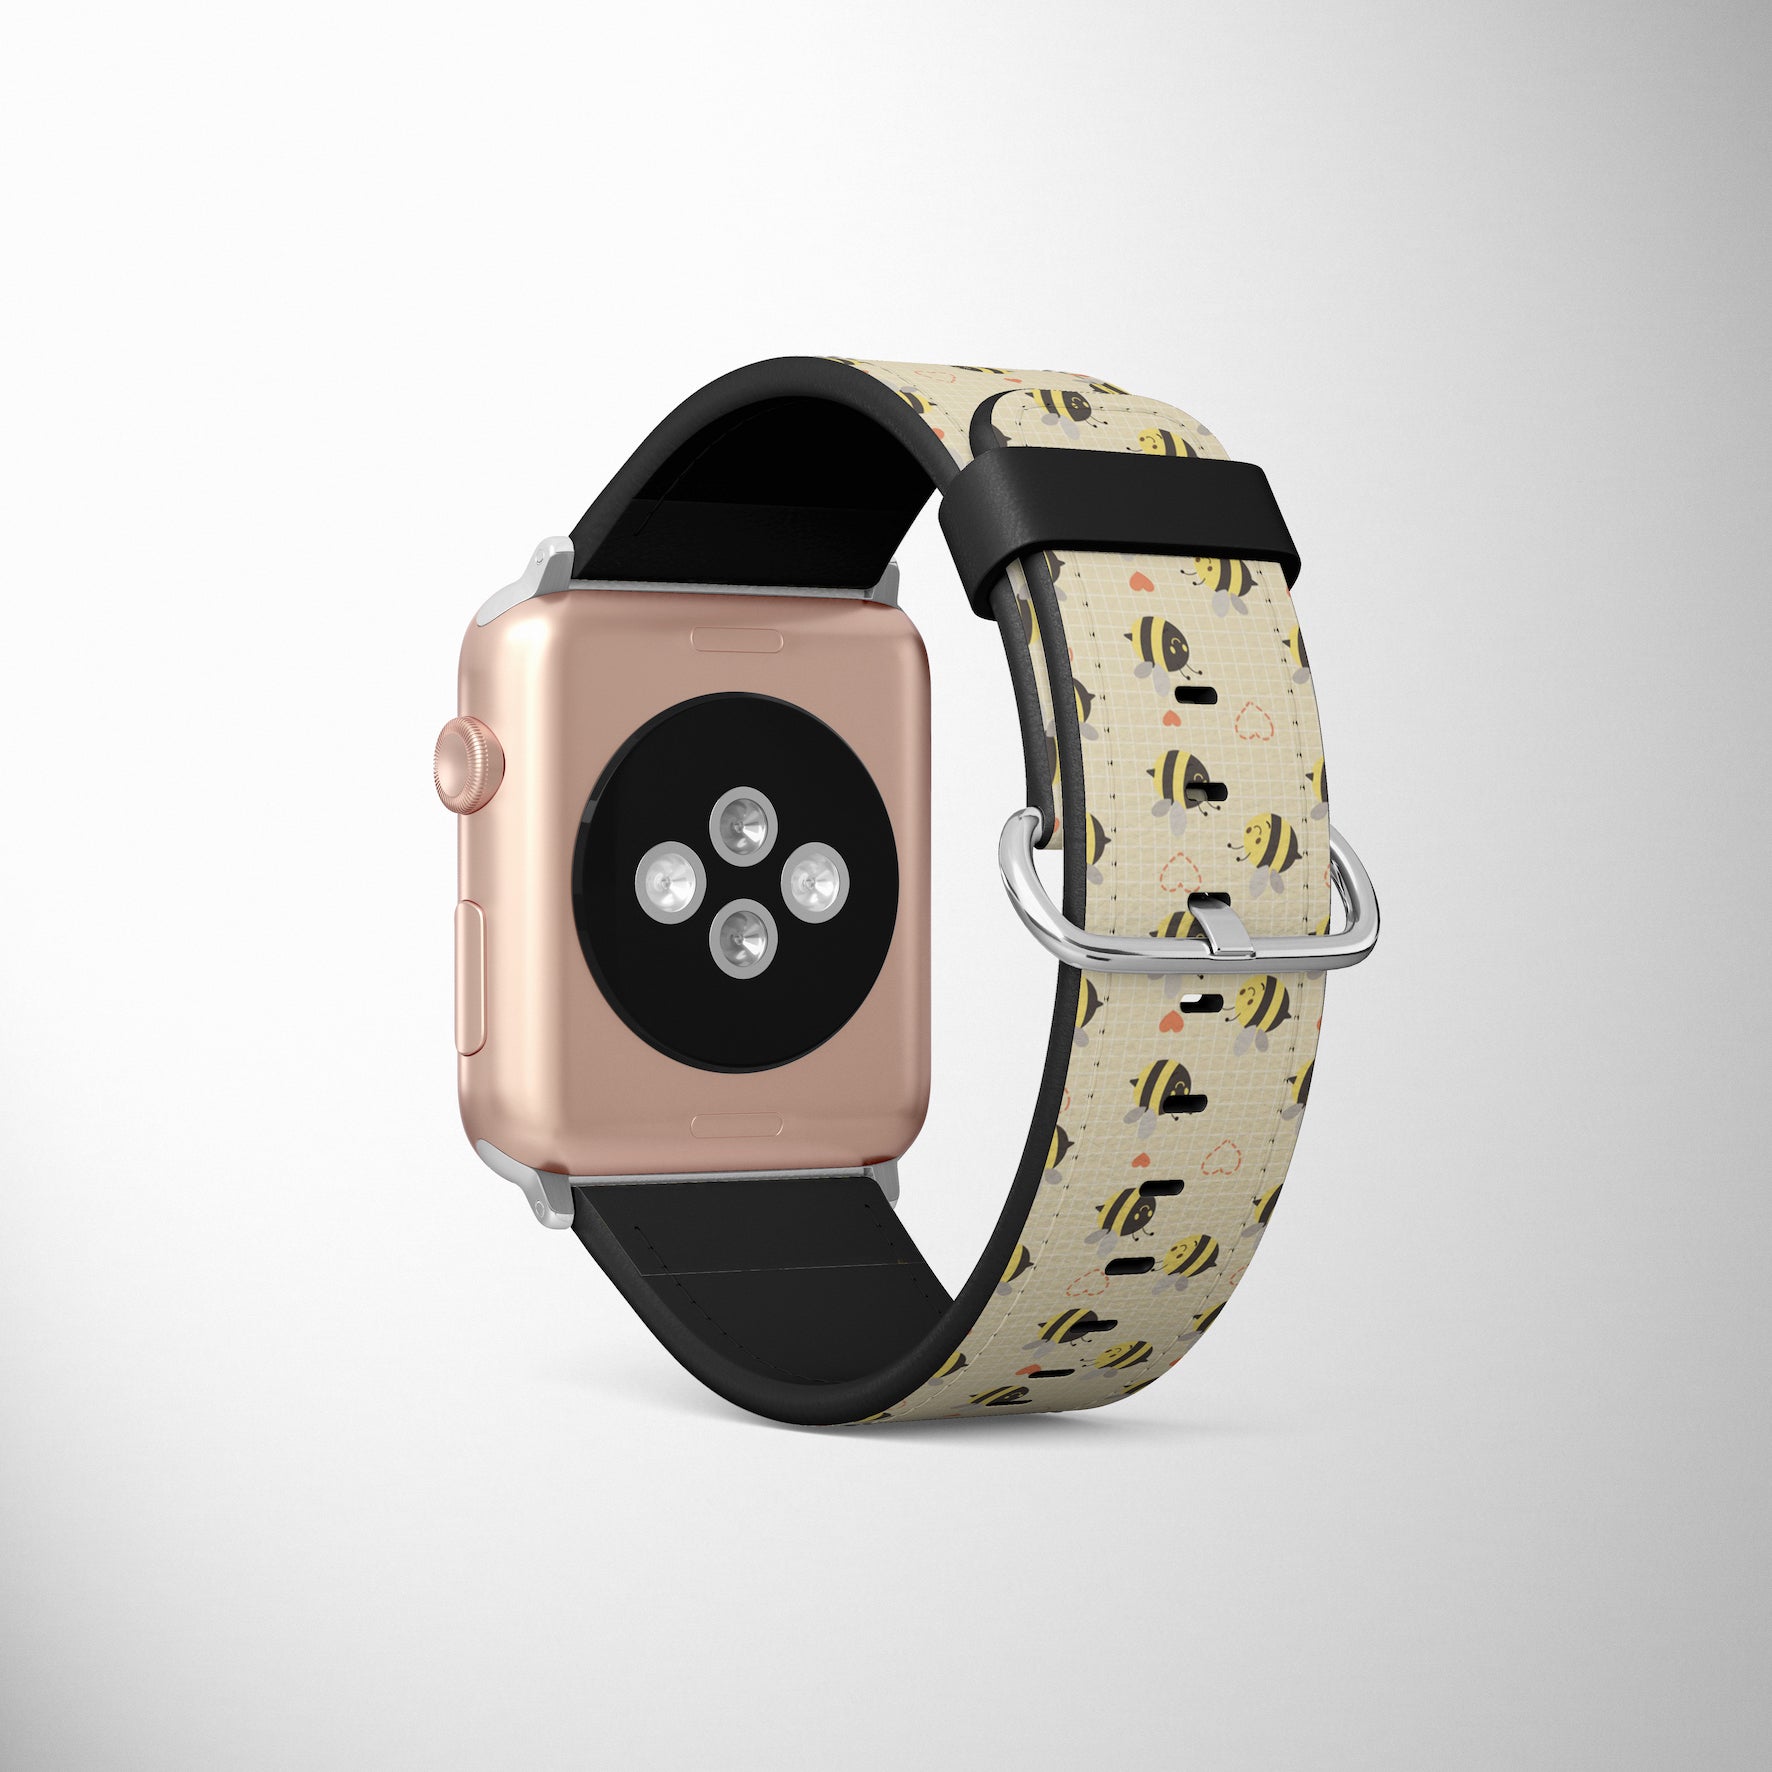 Bumble Bees & Hearts Faux Leather Apple Watch Band for Apple Watch 1,2,3,4,5,6,SE - www.scottsy.com